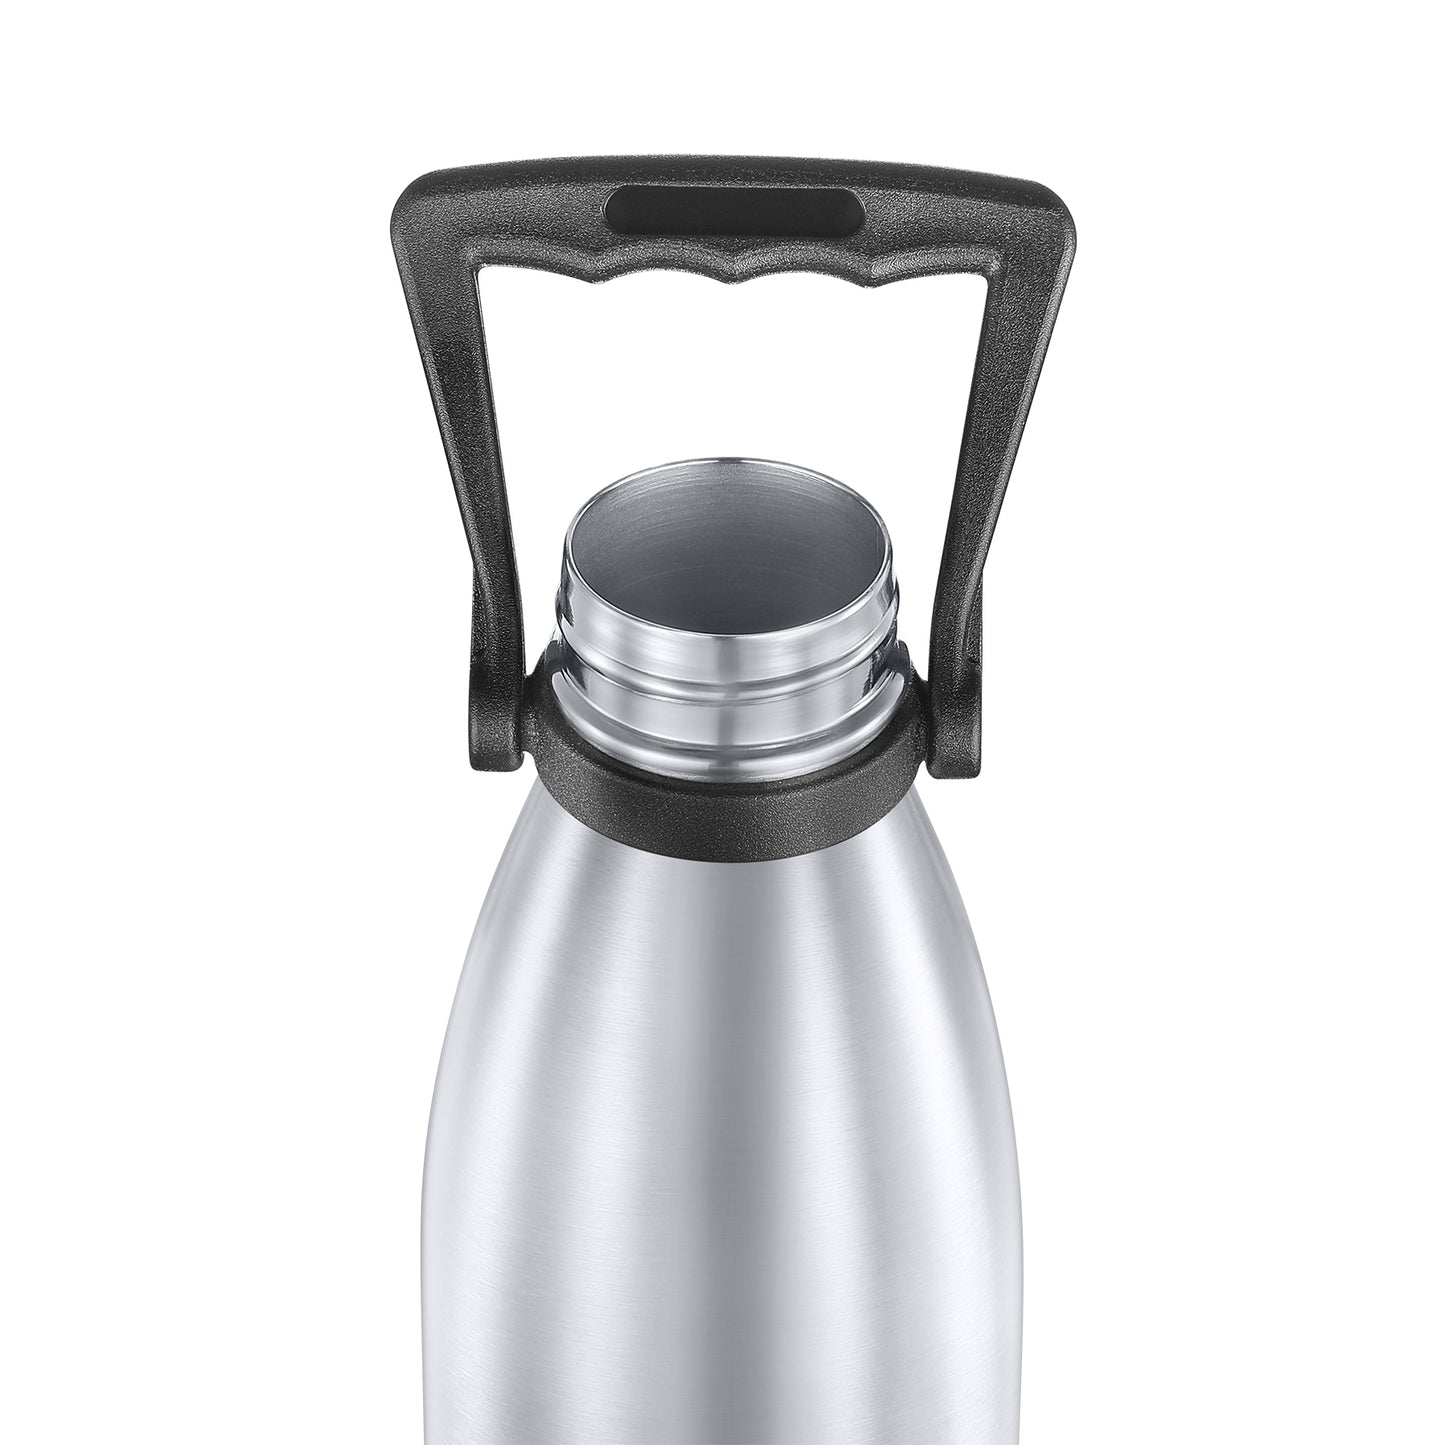 Pexpo Echo -Vacuum Insulated Stainless Steel  With Loop Handle Water Bottle | 24/7 Hot & Cold | ISI Certified